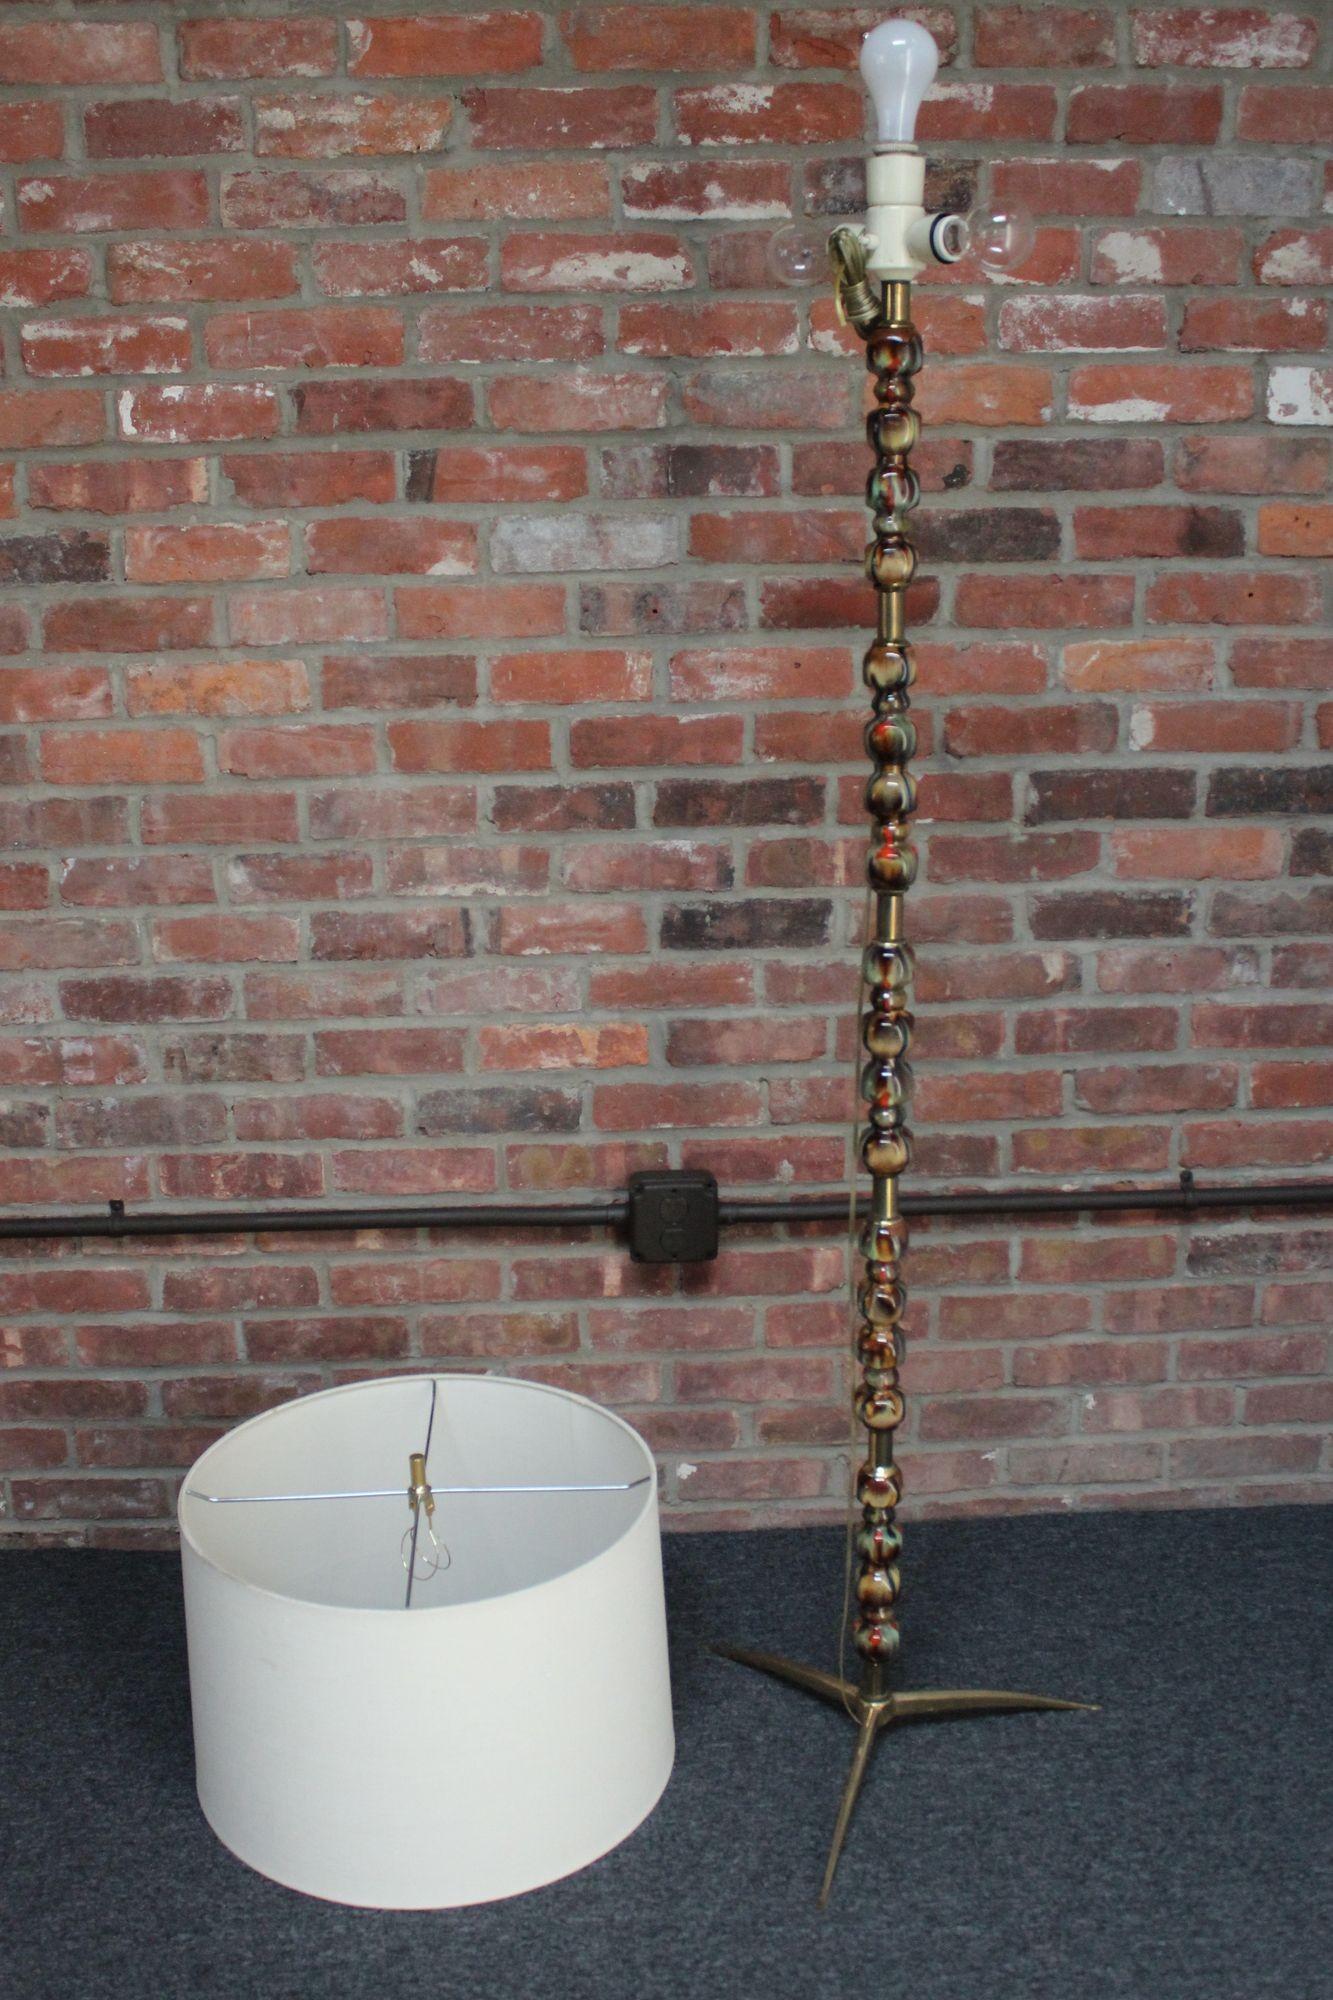 Italian floor lamp composed of clusters of sculptural ceramic adornments separated by brass brackets, all supported by a splayed tripod base (ca. 1960s).
Paired with an oversized, vintage drum shade, which shows light wear (one patch of